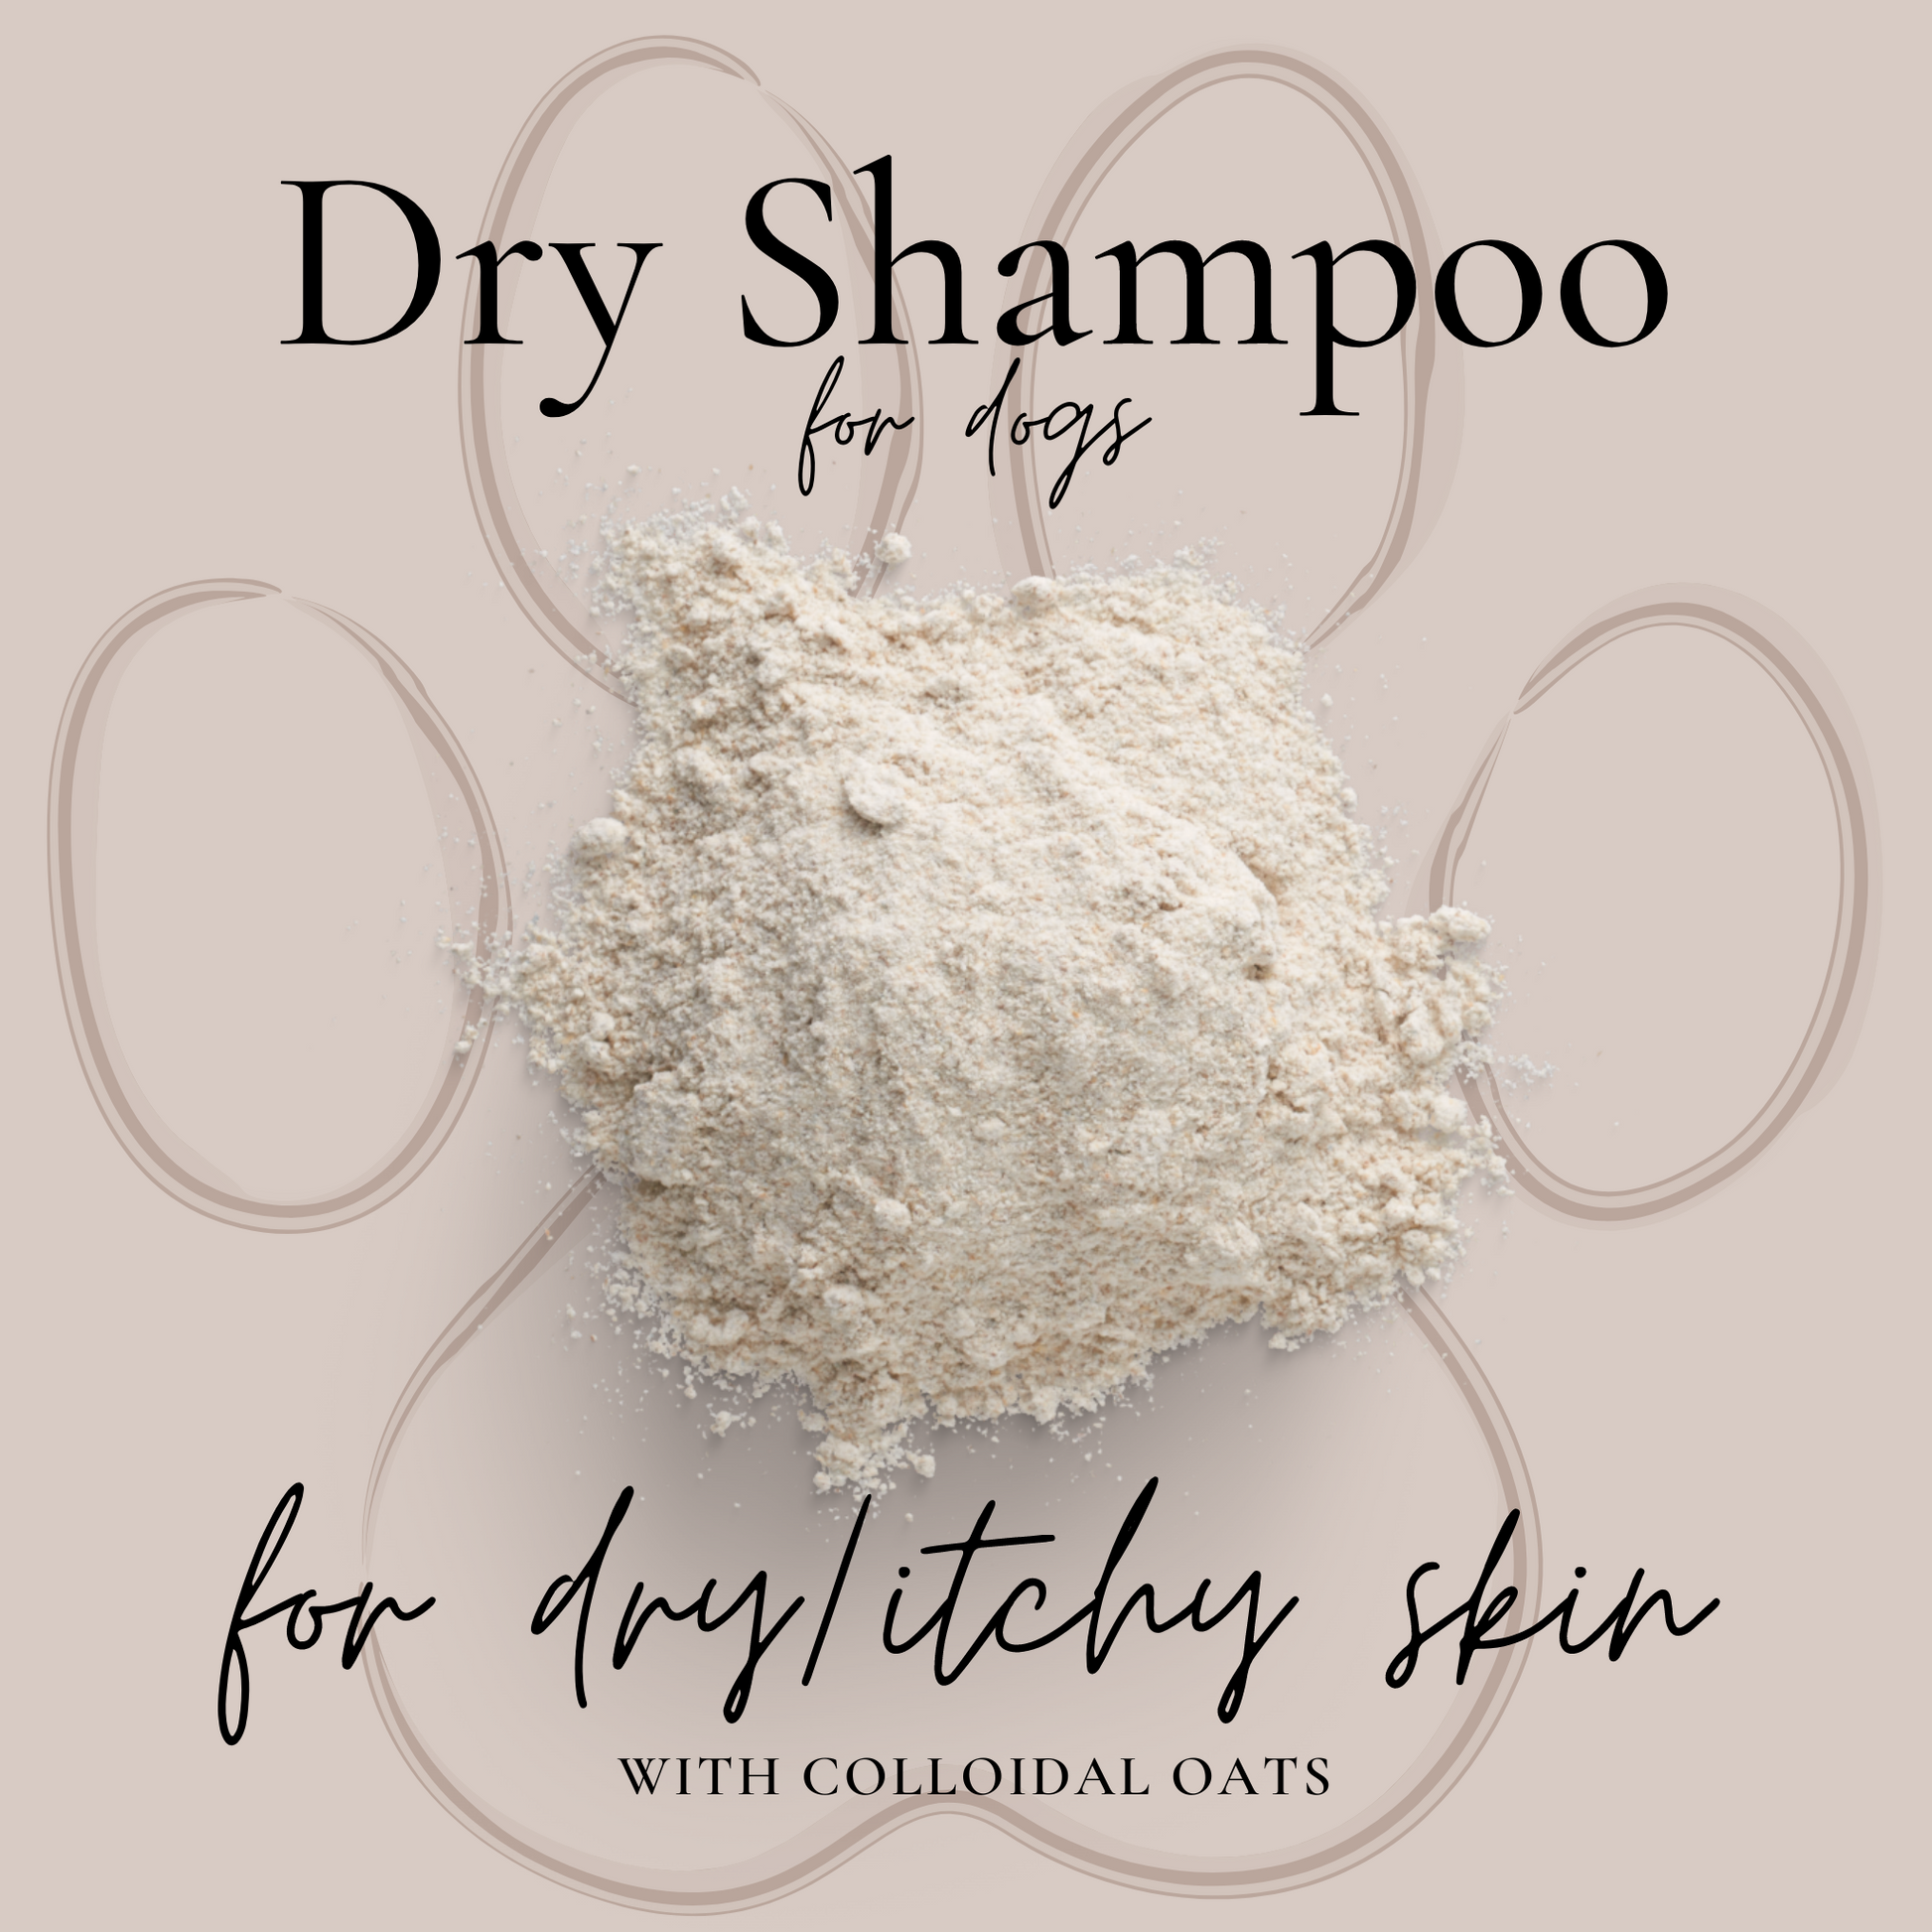 Dry shampoo powder made with colloidal oatmeal for dry itchy skin